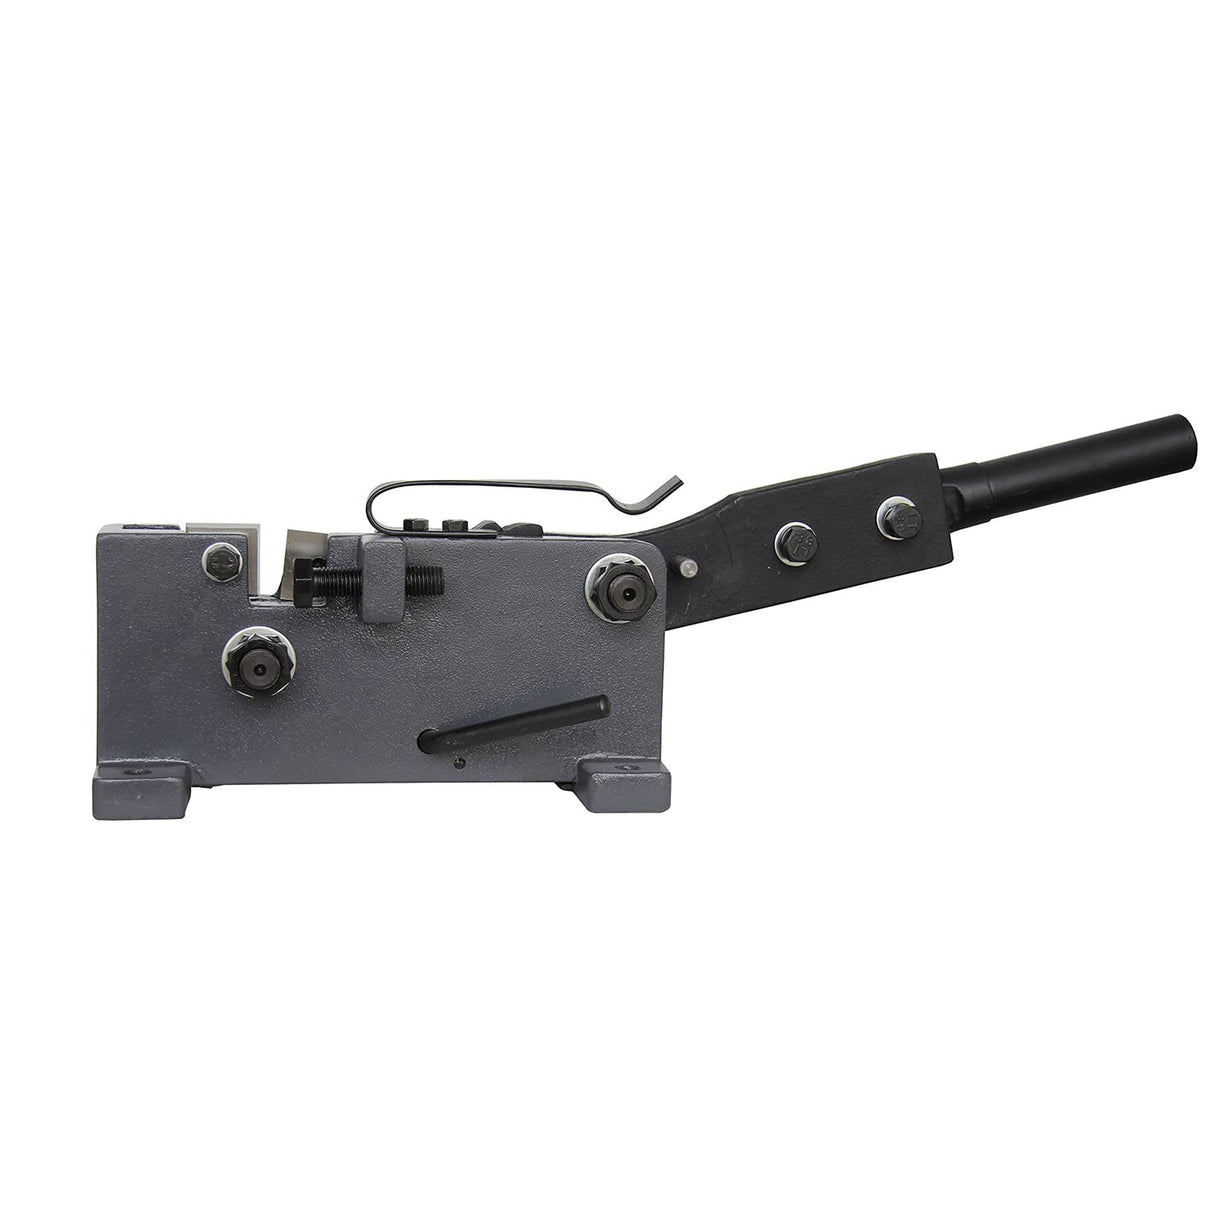 KANG Industrial MS-20 20mm Sheet Metal Shears, and Versatility, Rebar and Rod Cutter, Steel Cutter, Flat Bar Steel, Round Steel Metal Cutter